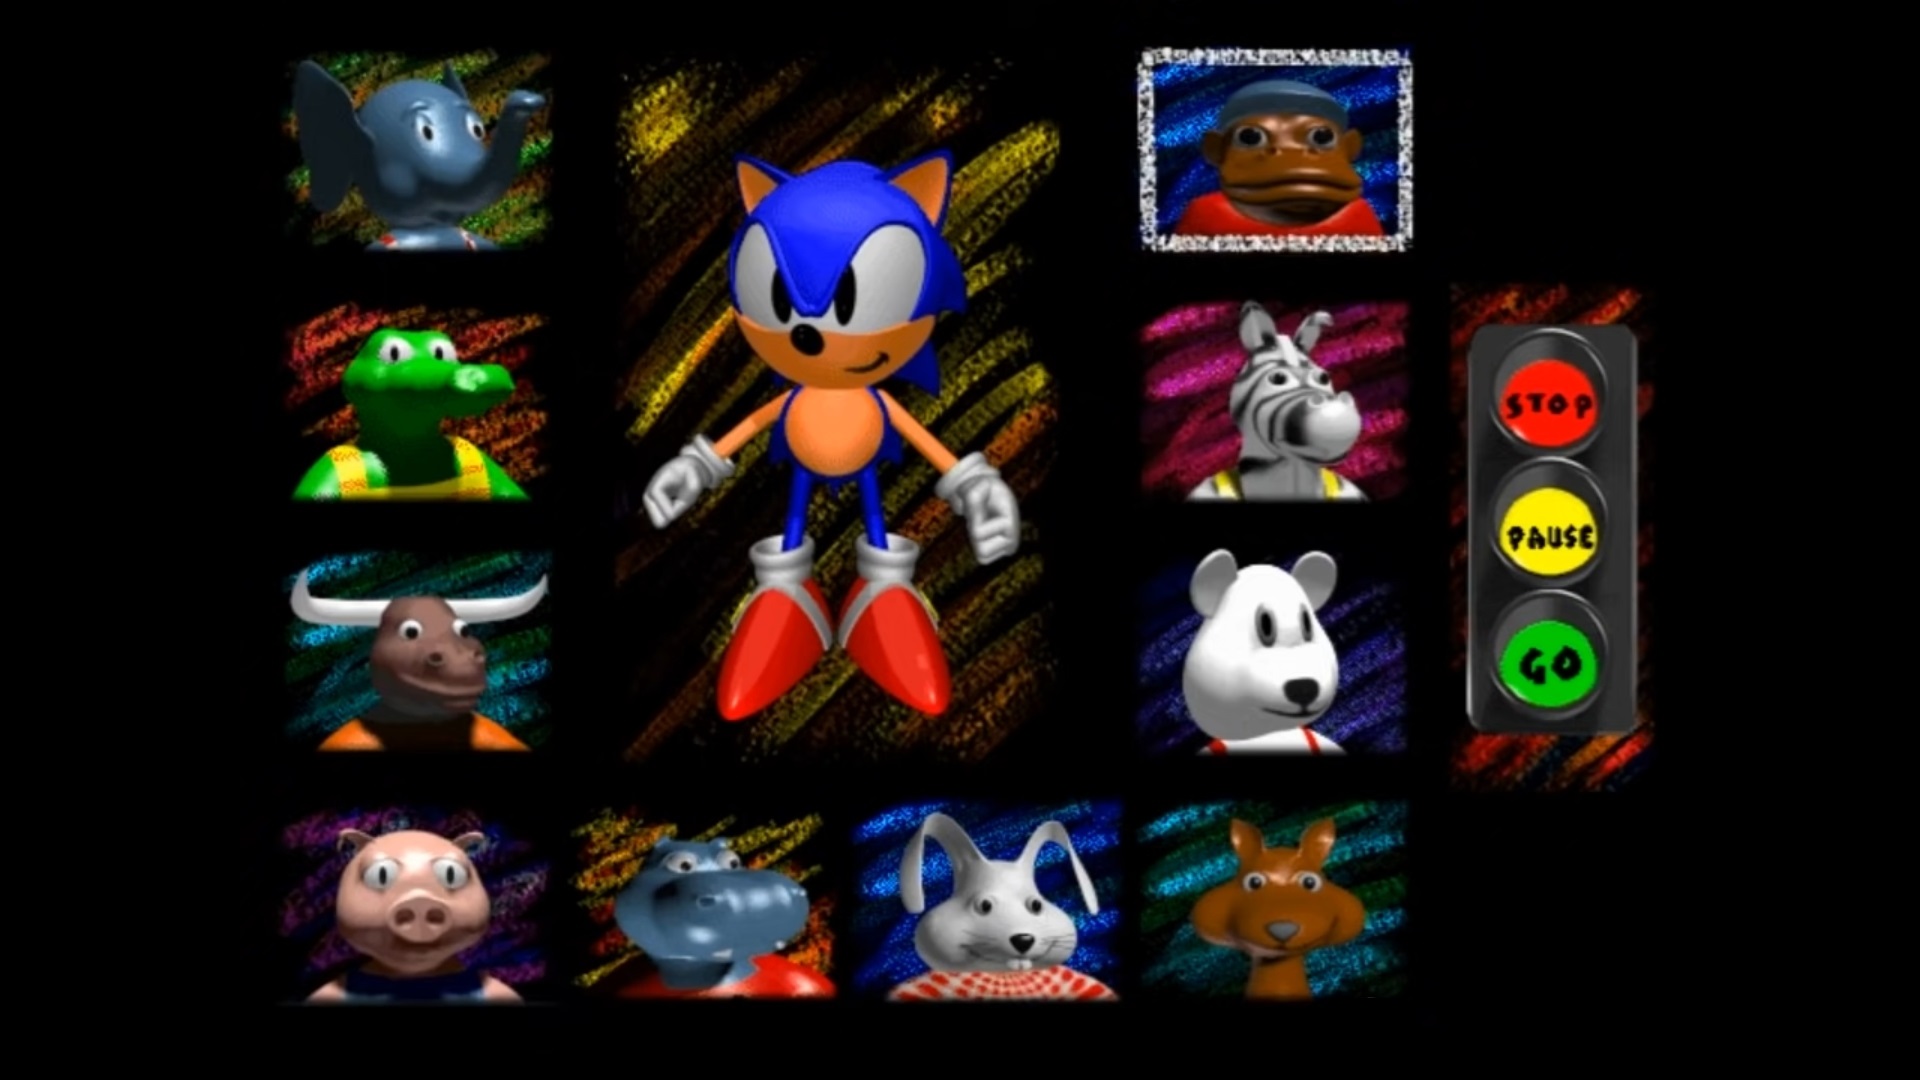 Best educational games: Sonic's Schoolhouse. Image shows Sonic and a selection of strange characters on a character select screen.